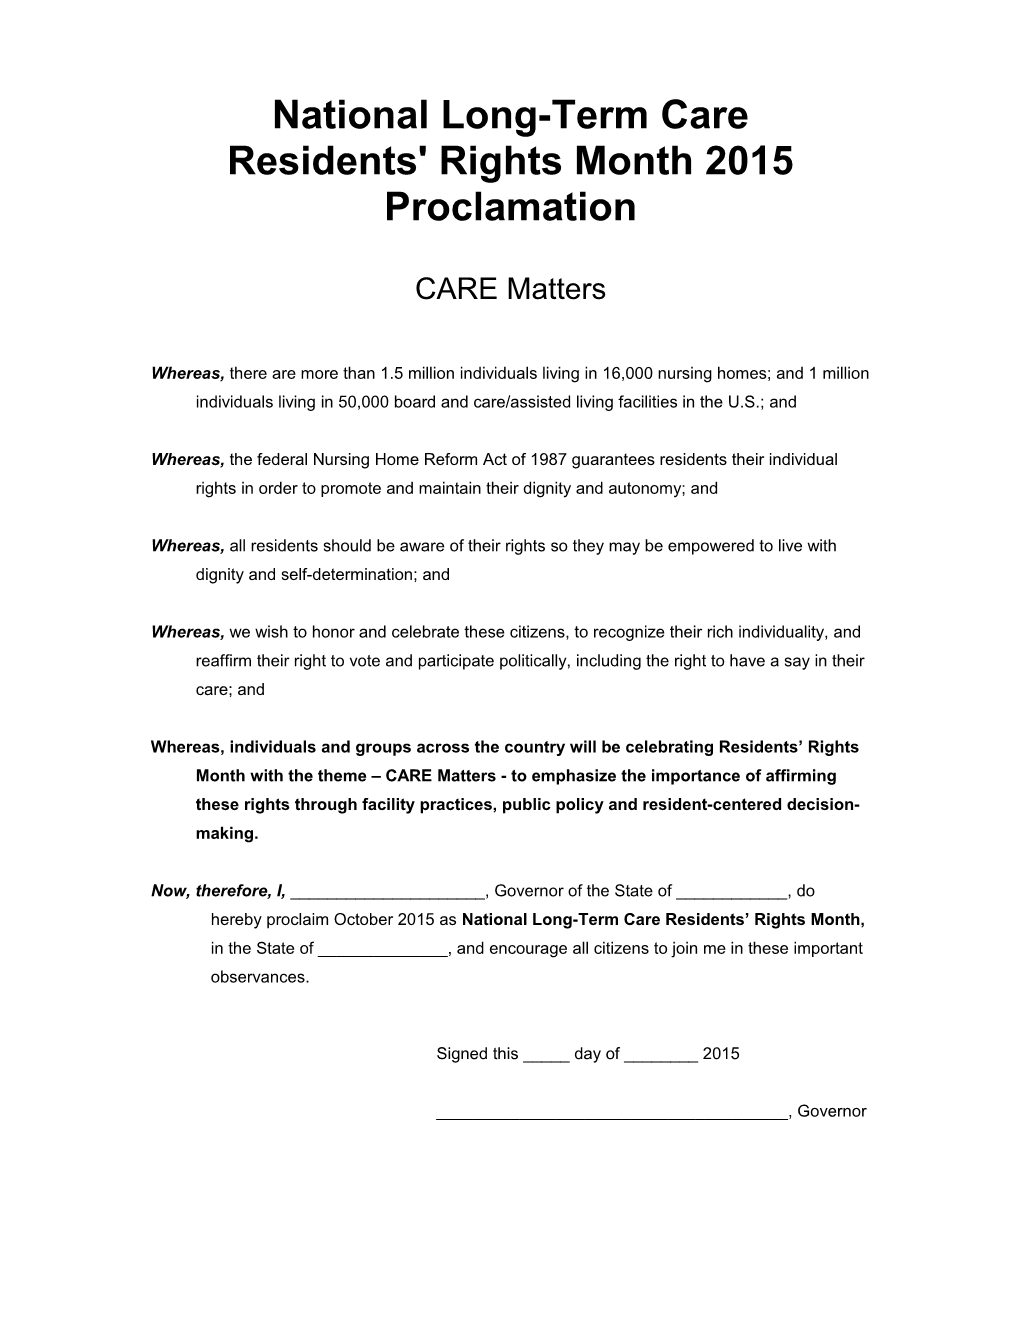 National Long-Term Care Residents' Rights Week 2009 Proclamation